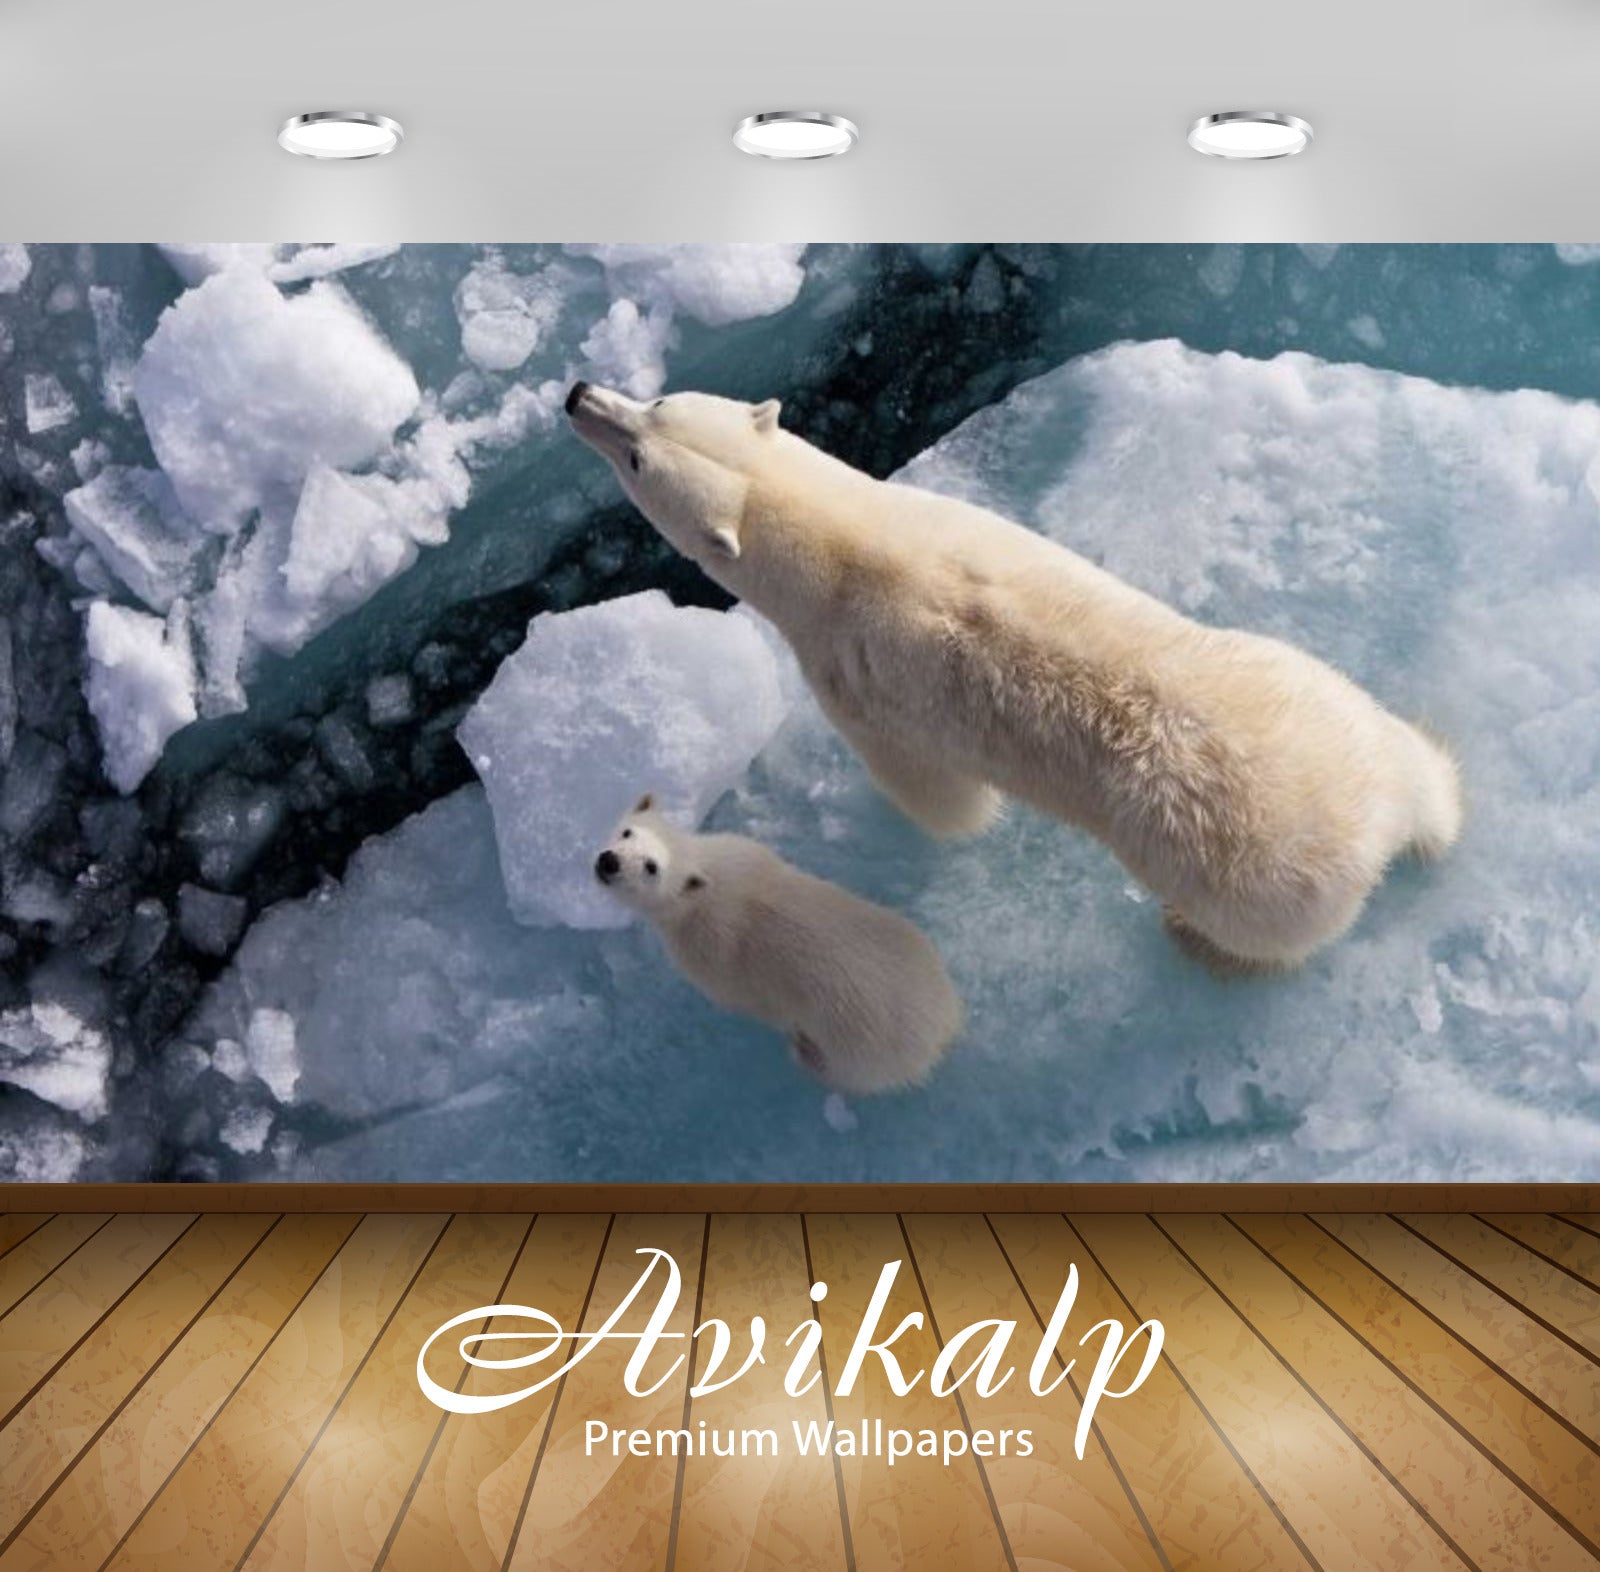 Avikalp Exclusive Awi2635 Flyovers White Polar Bear With Cub Full HD Wallpapers for Living room, Hal